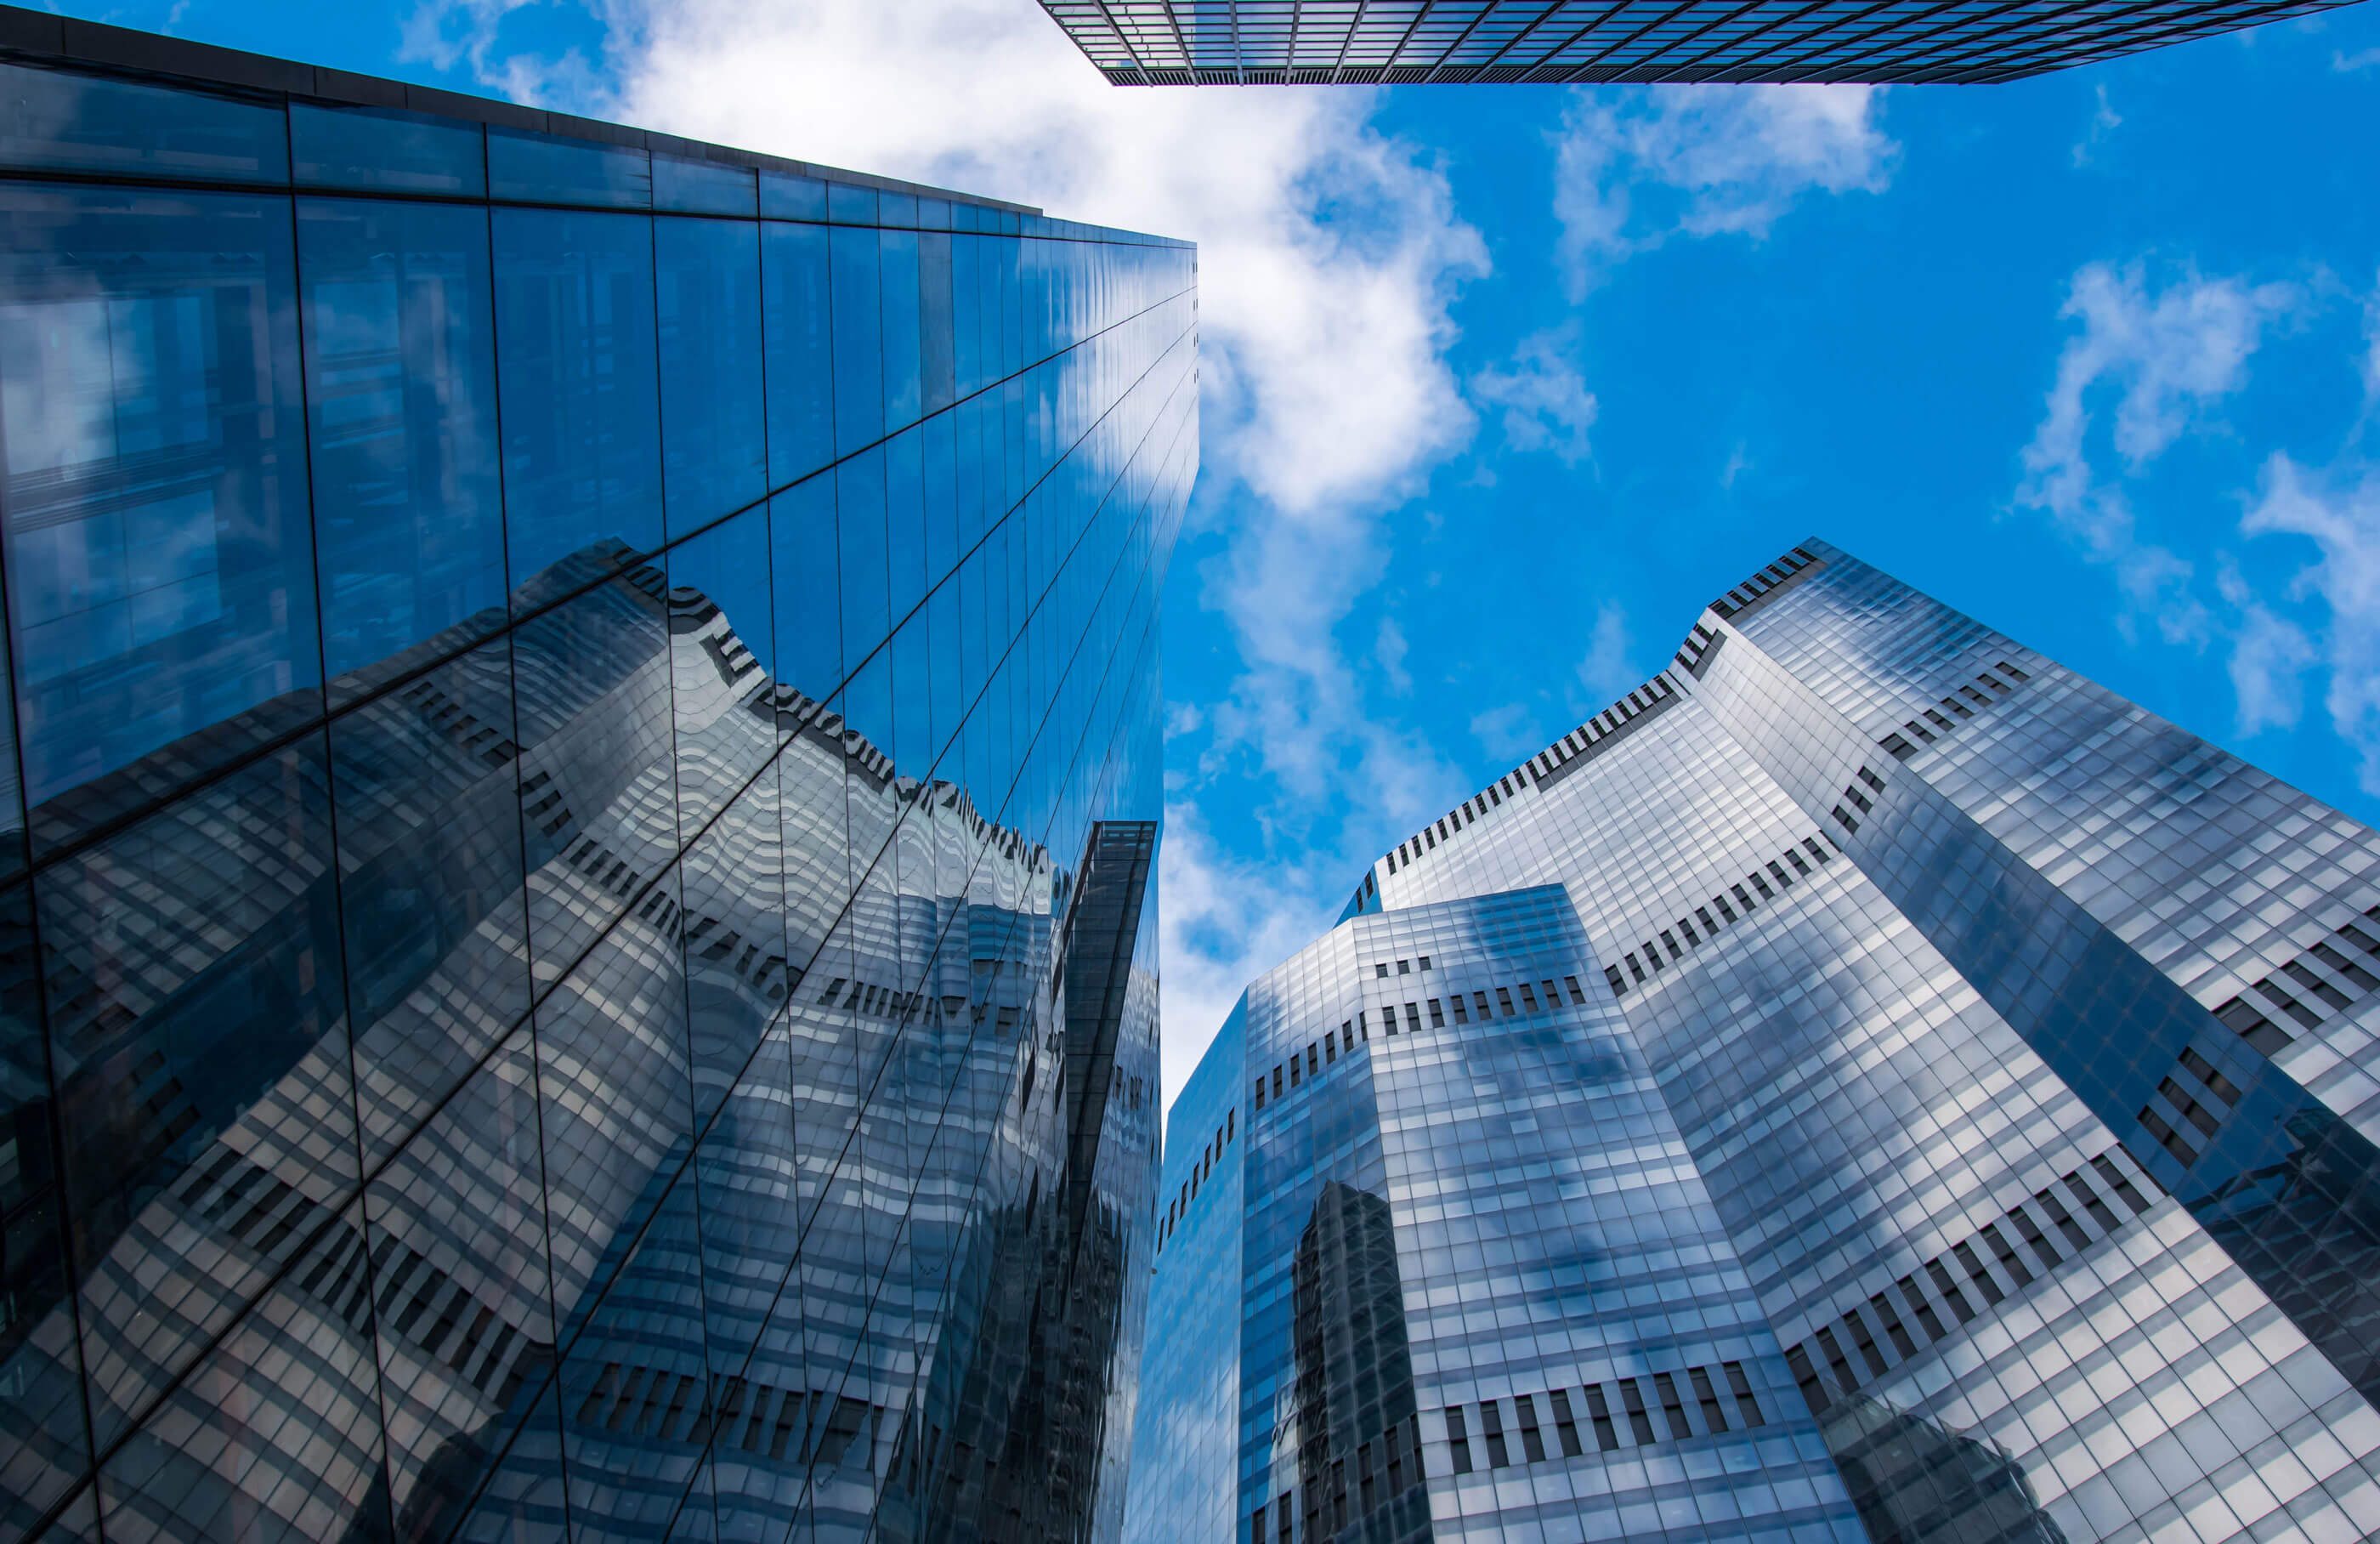 Skyscraper buildings with blue sky and clouds